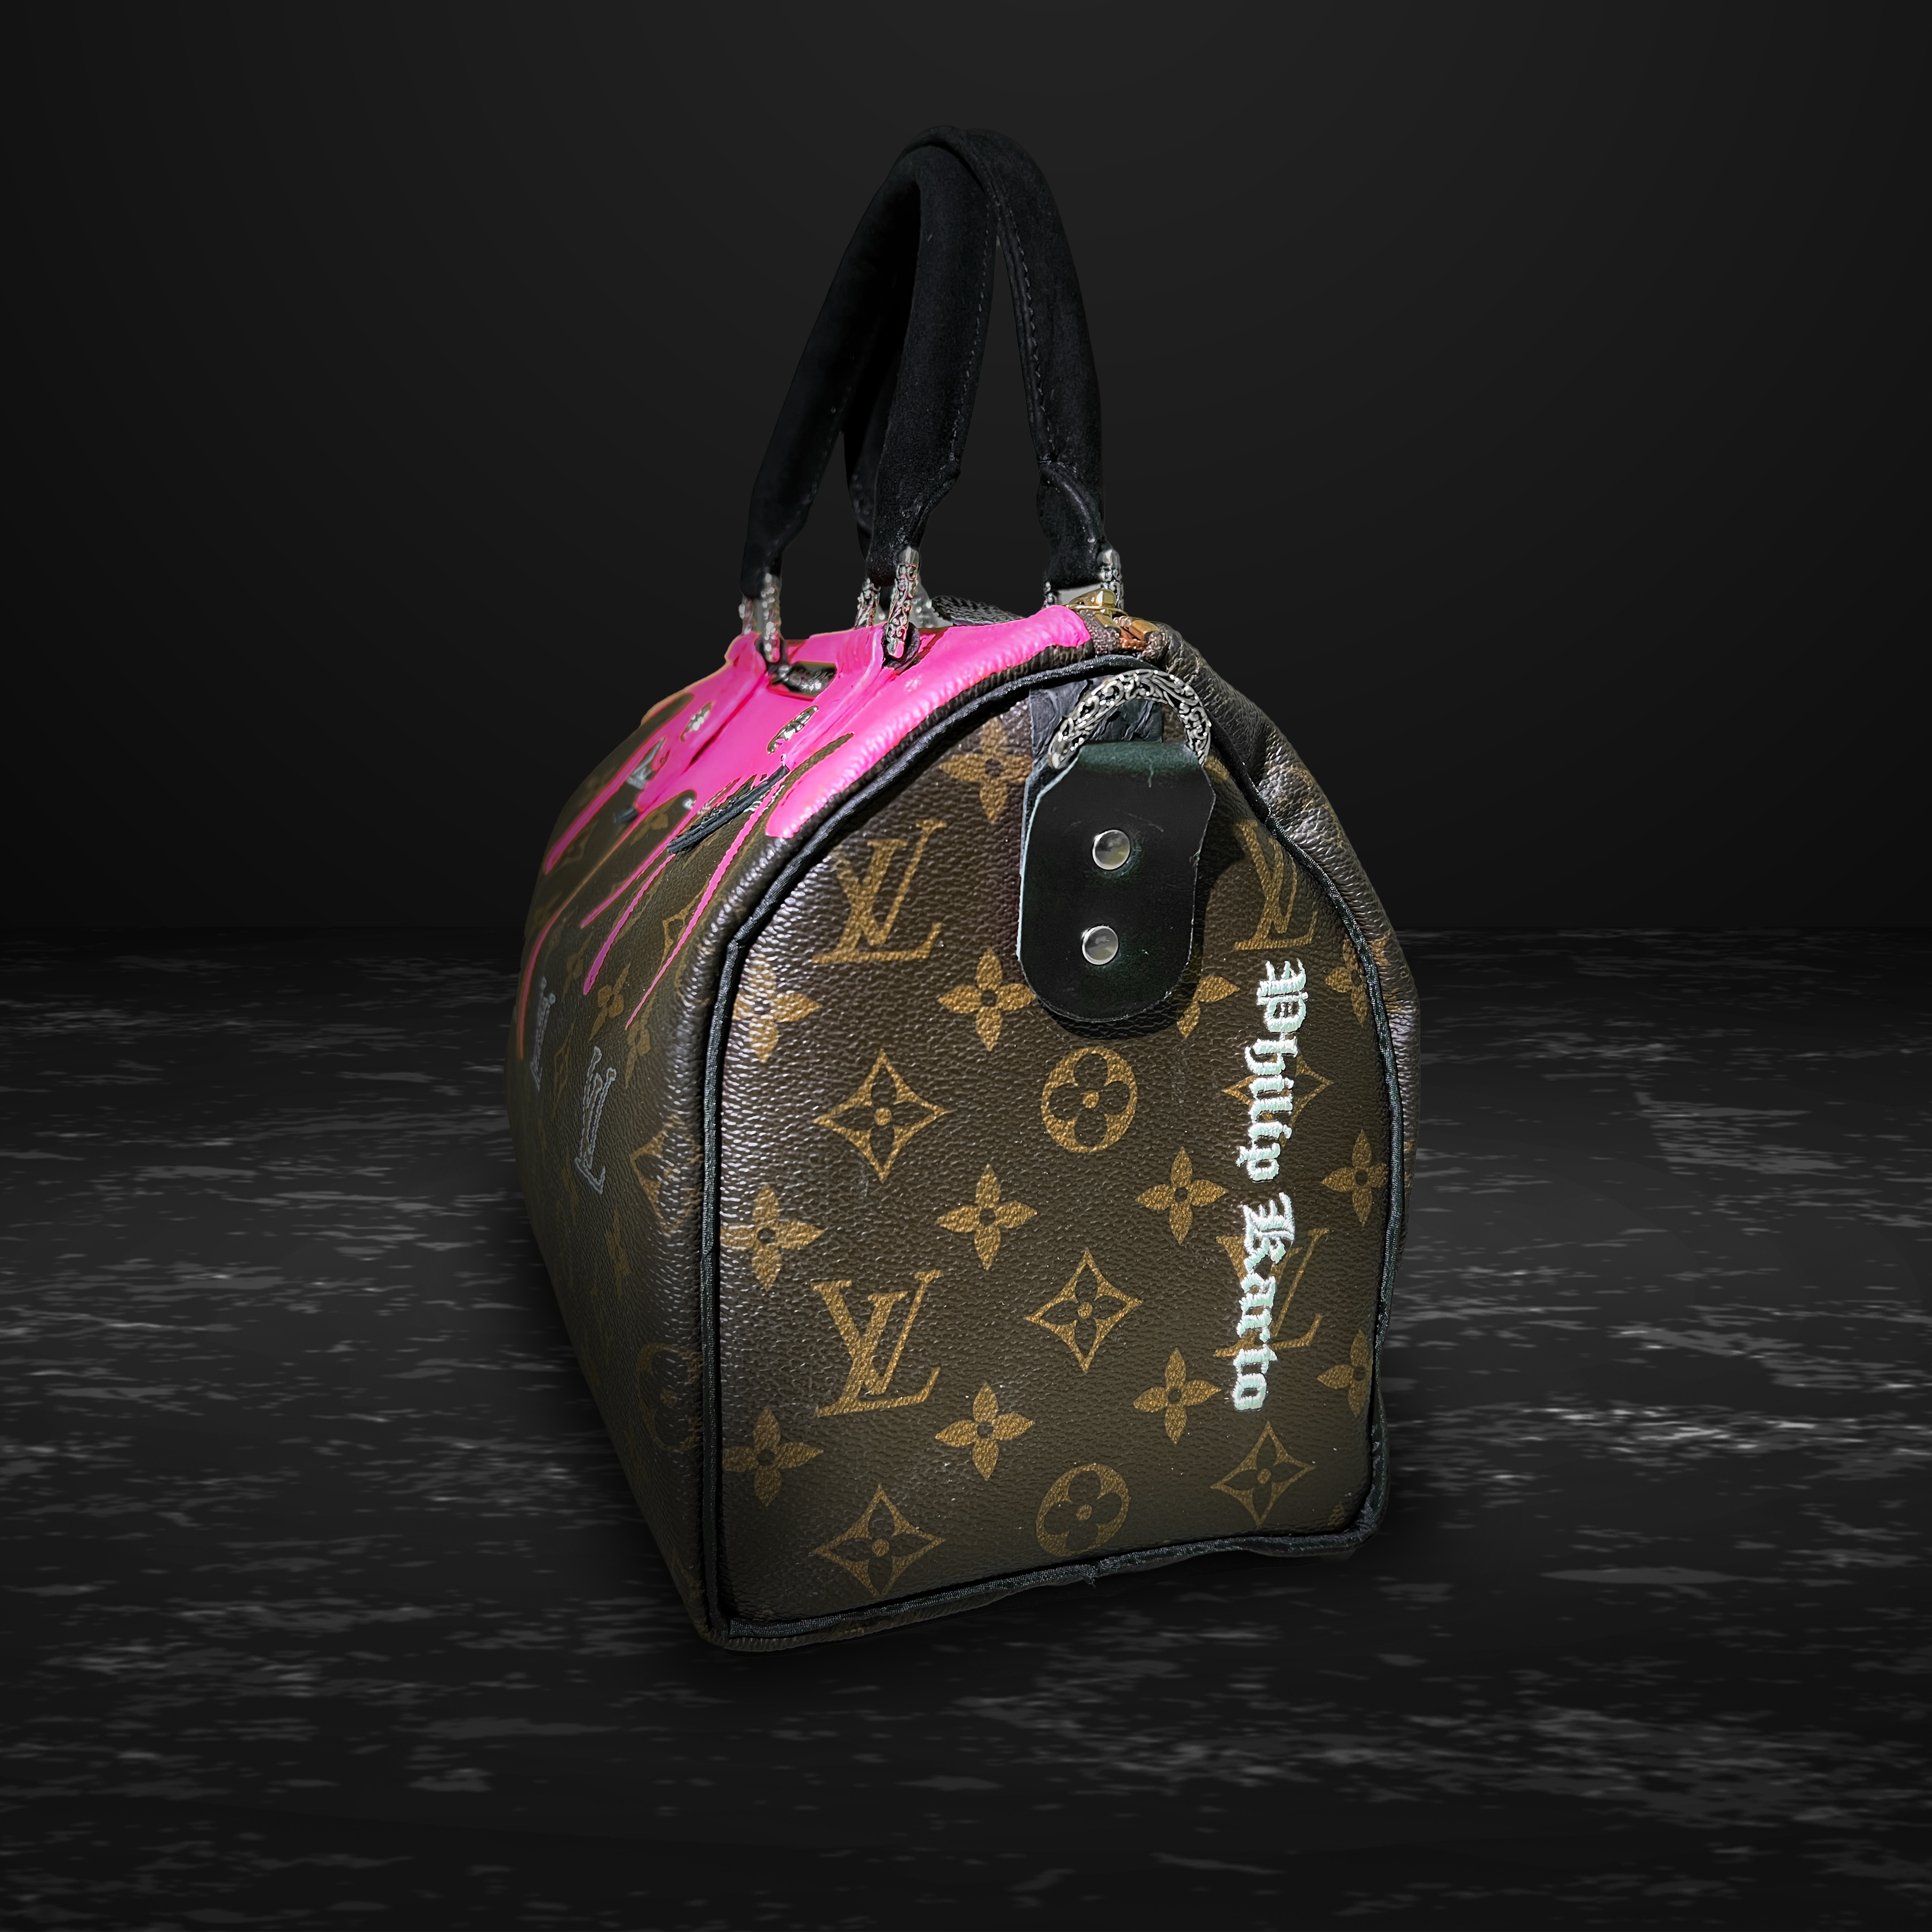 Full List of Louis Vuitton Speedy Limited Editions (Reference